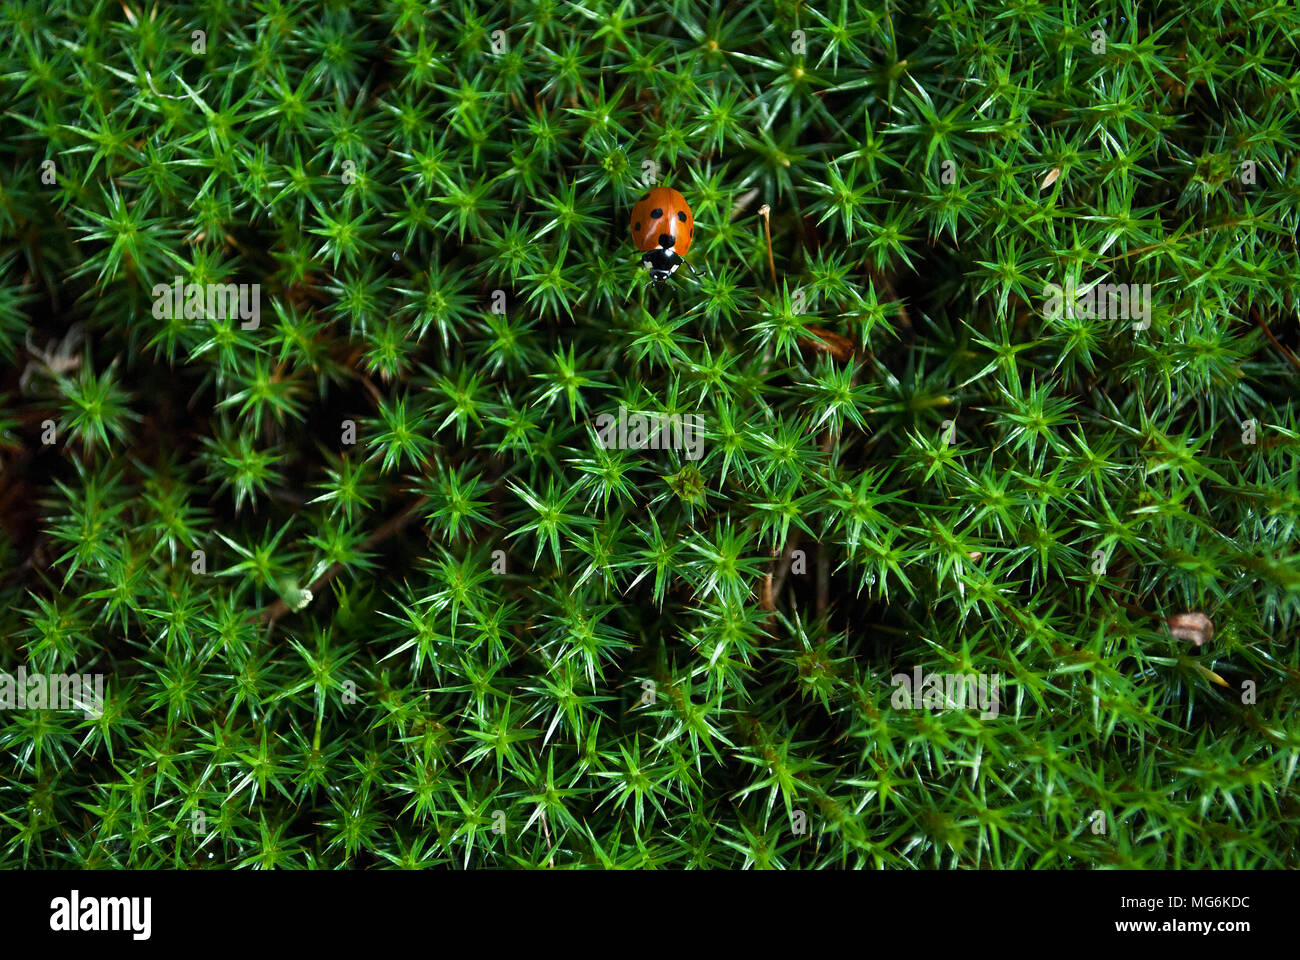 The Star-shaped Green Moss with a ladybug on it (Polytrichum juniperinum) Stock Photo